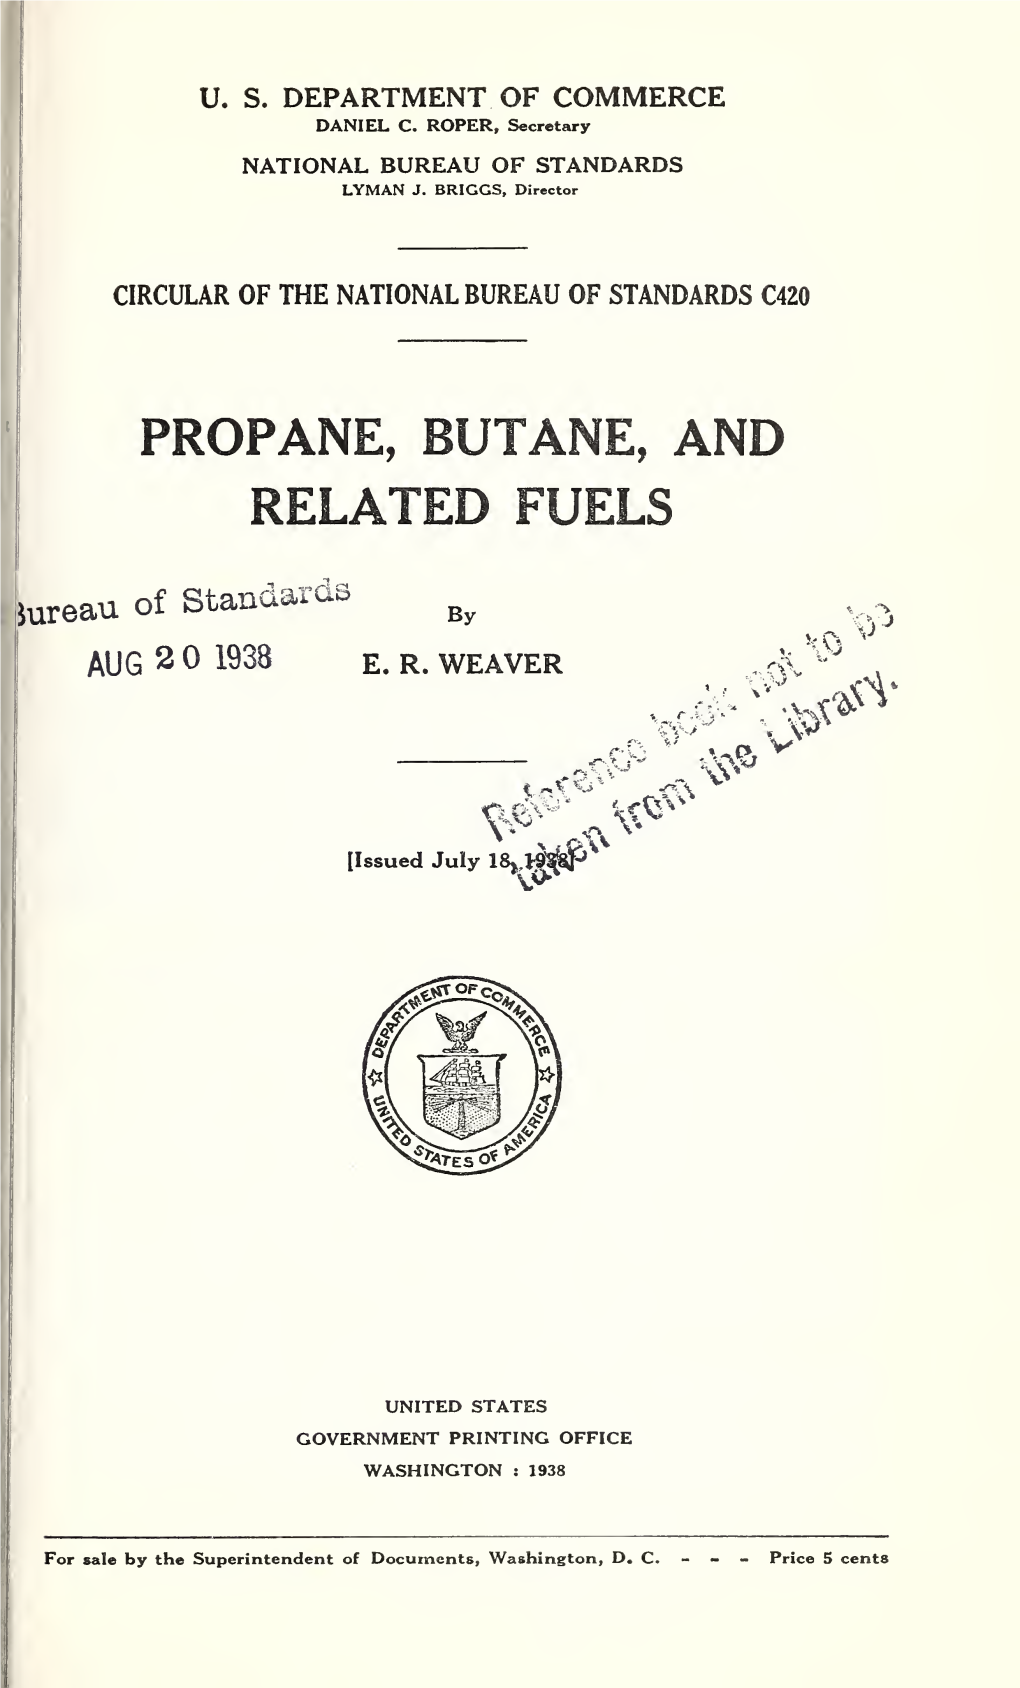 Propane, Butane, and Related Fuels